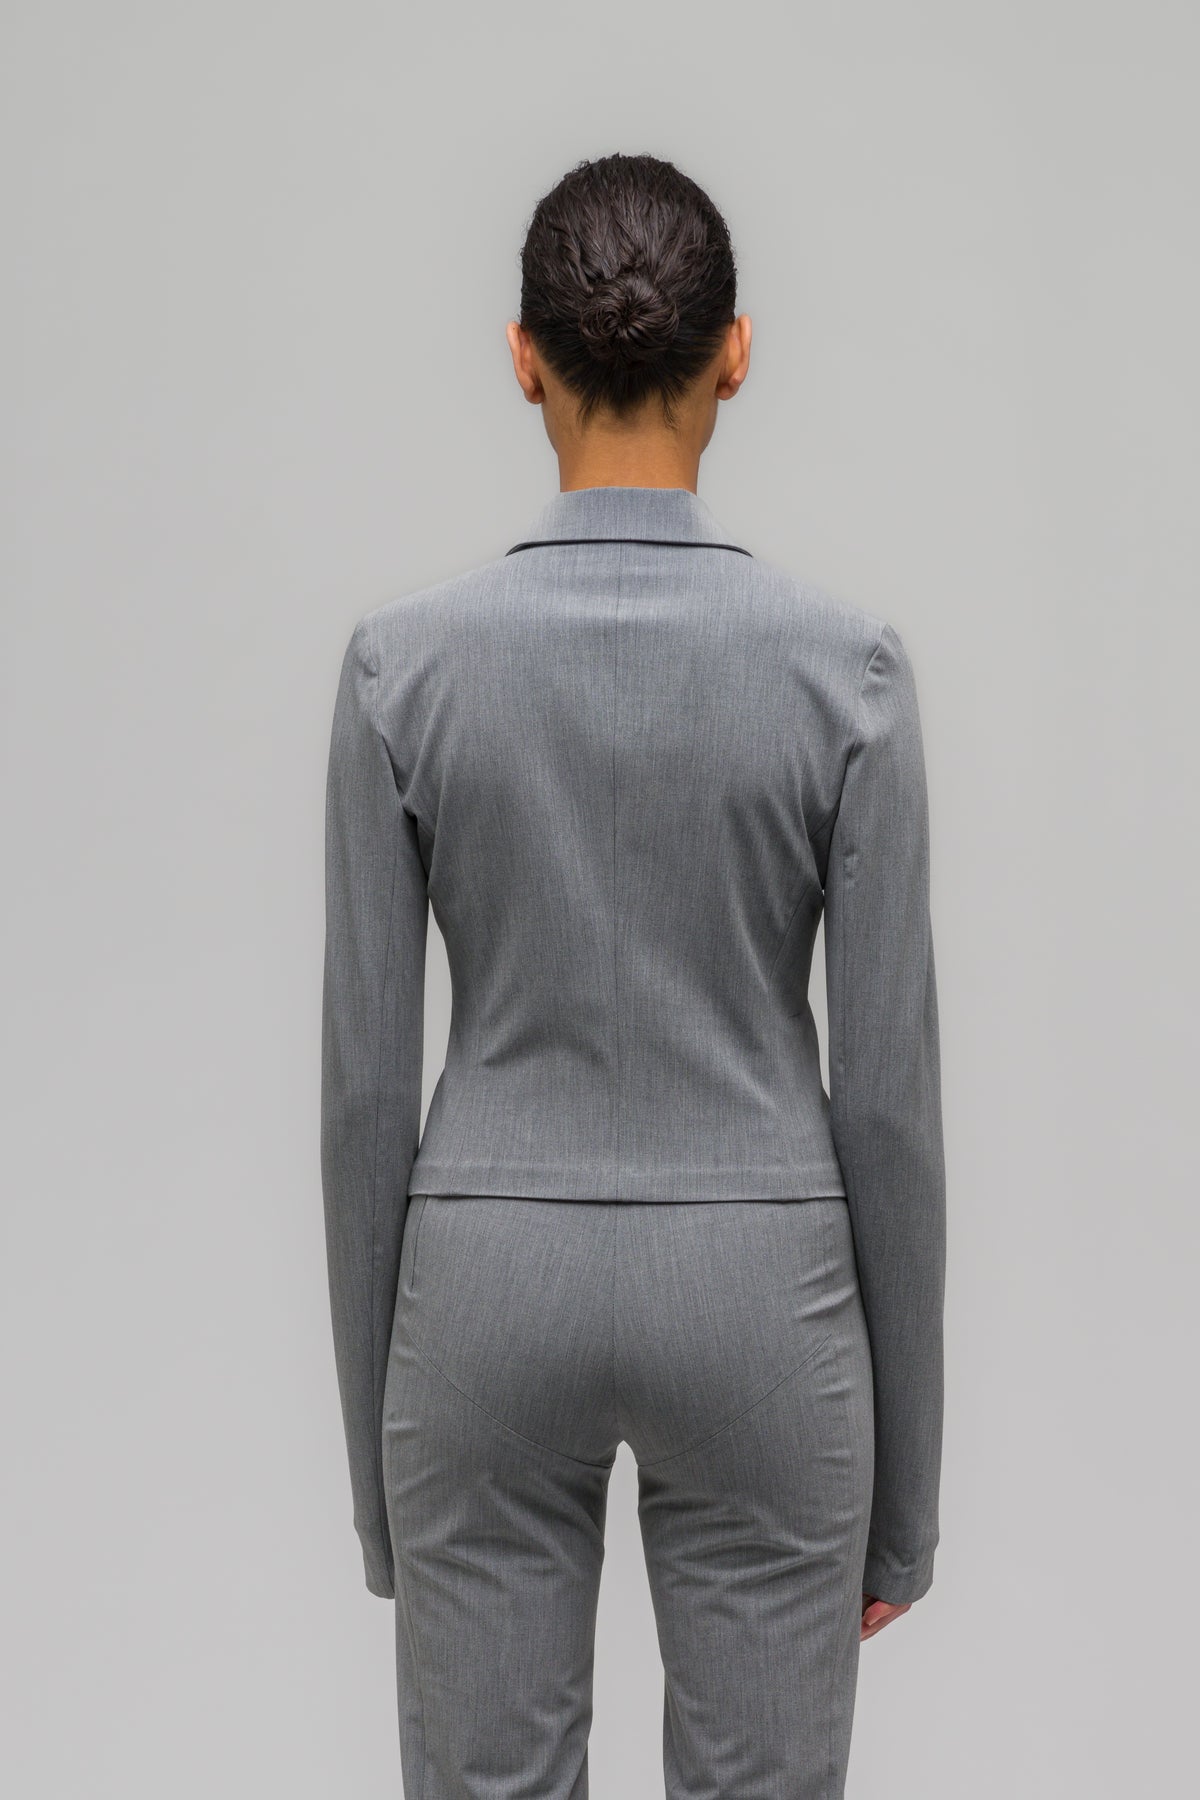 TRAPEZE TOO-TIGHT WOOL SUIT JACKET